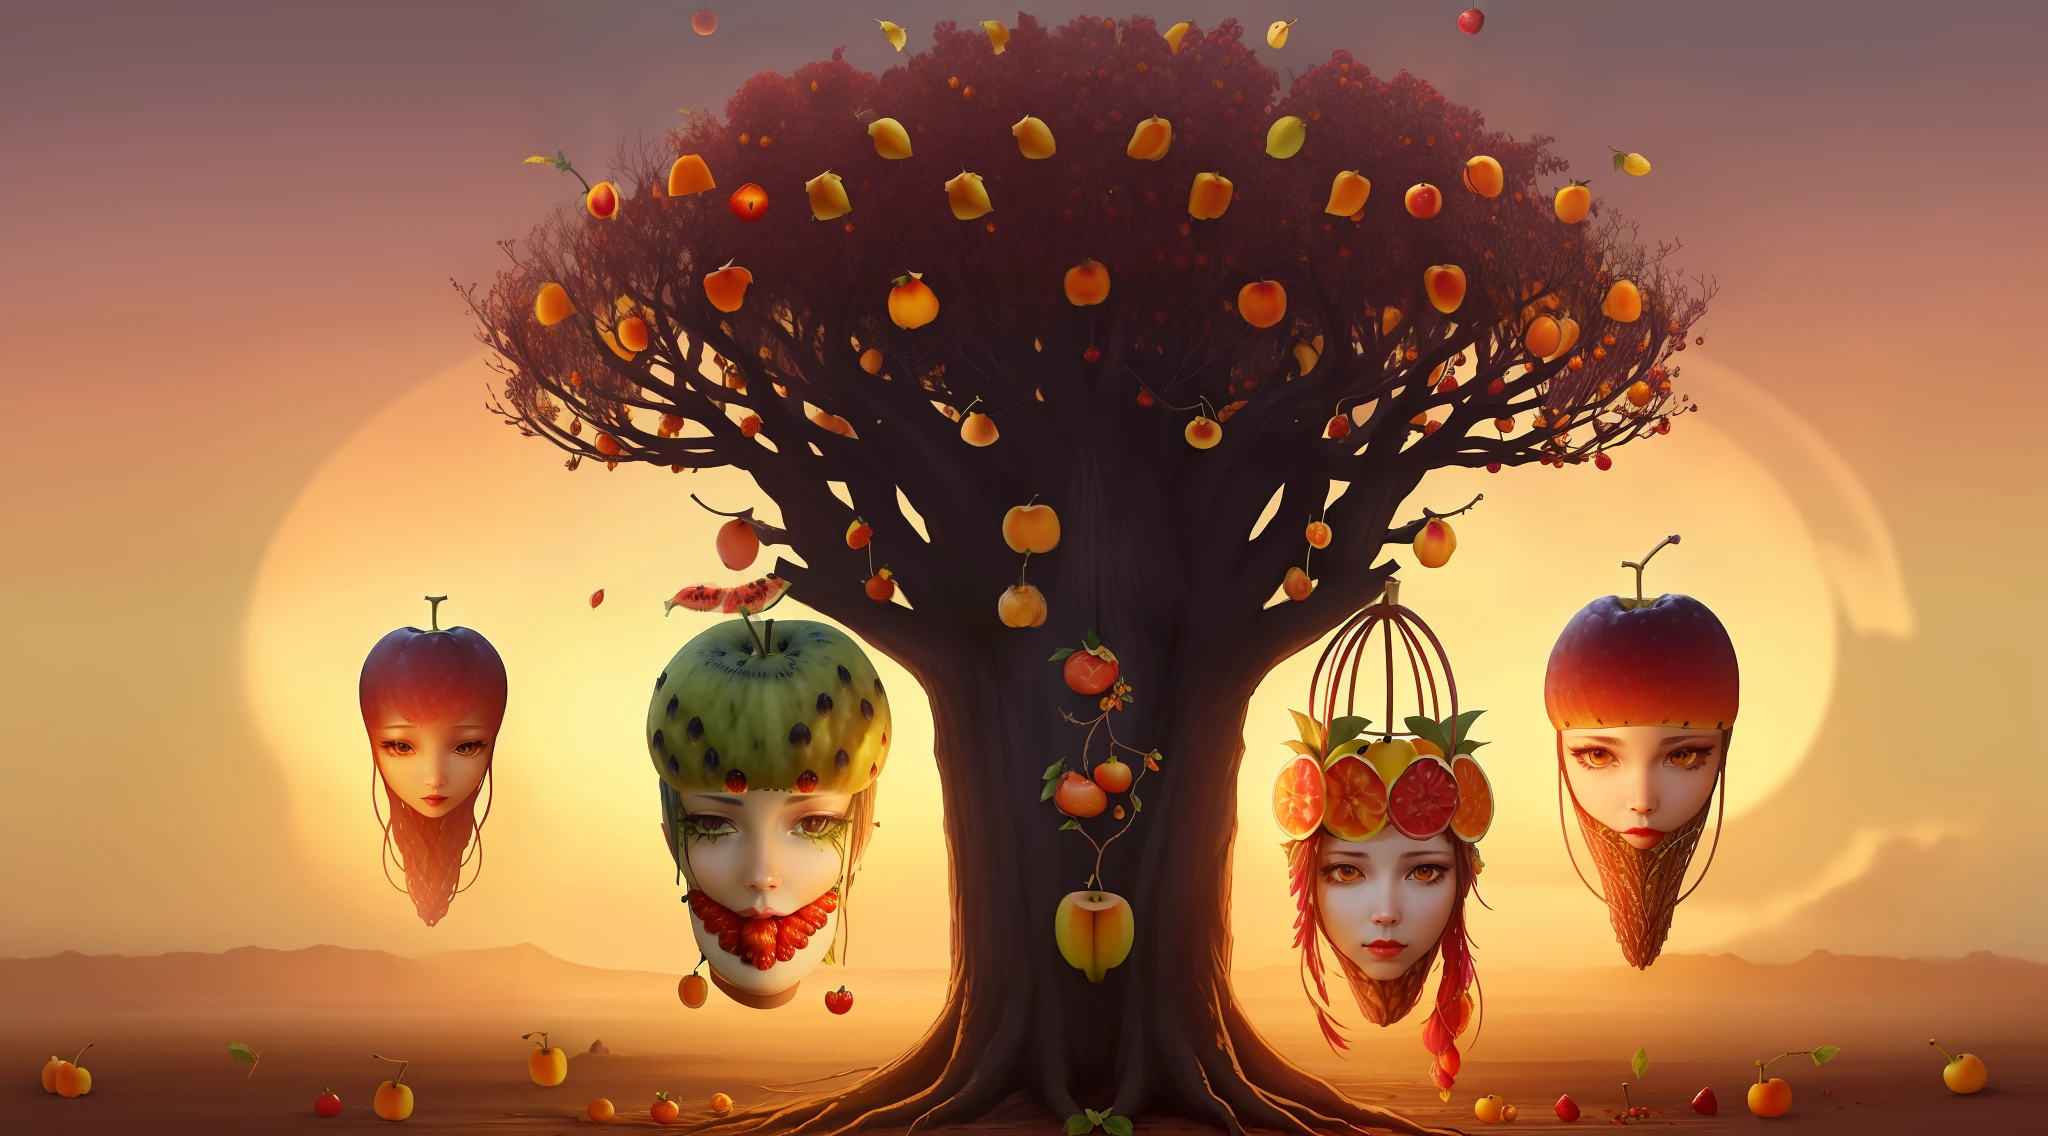 1 macabre tree full of gains and fruit heads of every kind of humanoid , fantasia sombria, (((((replace fruits with heads))))) arvore infernal